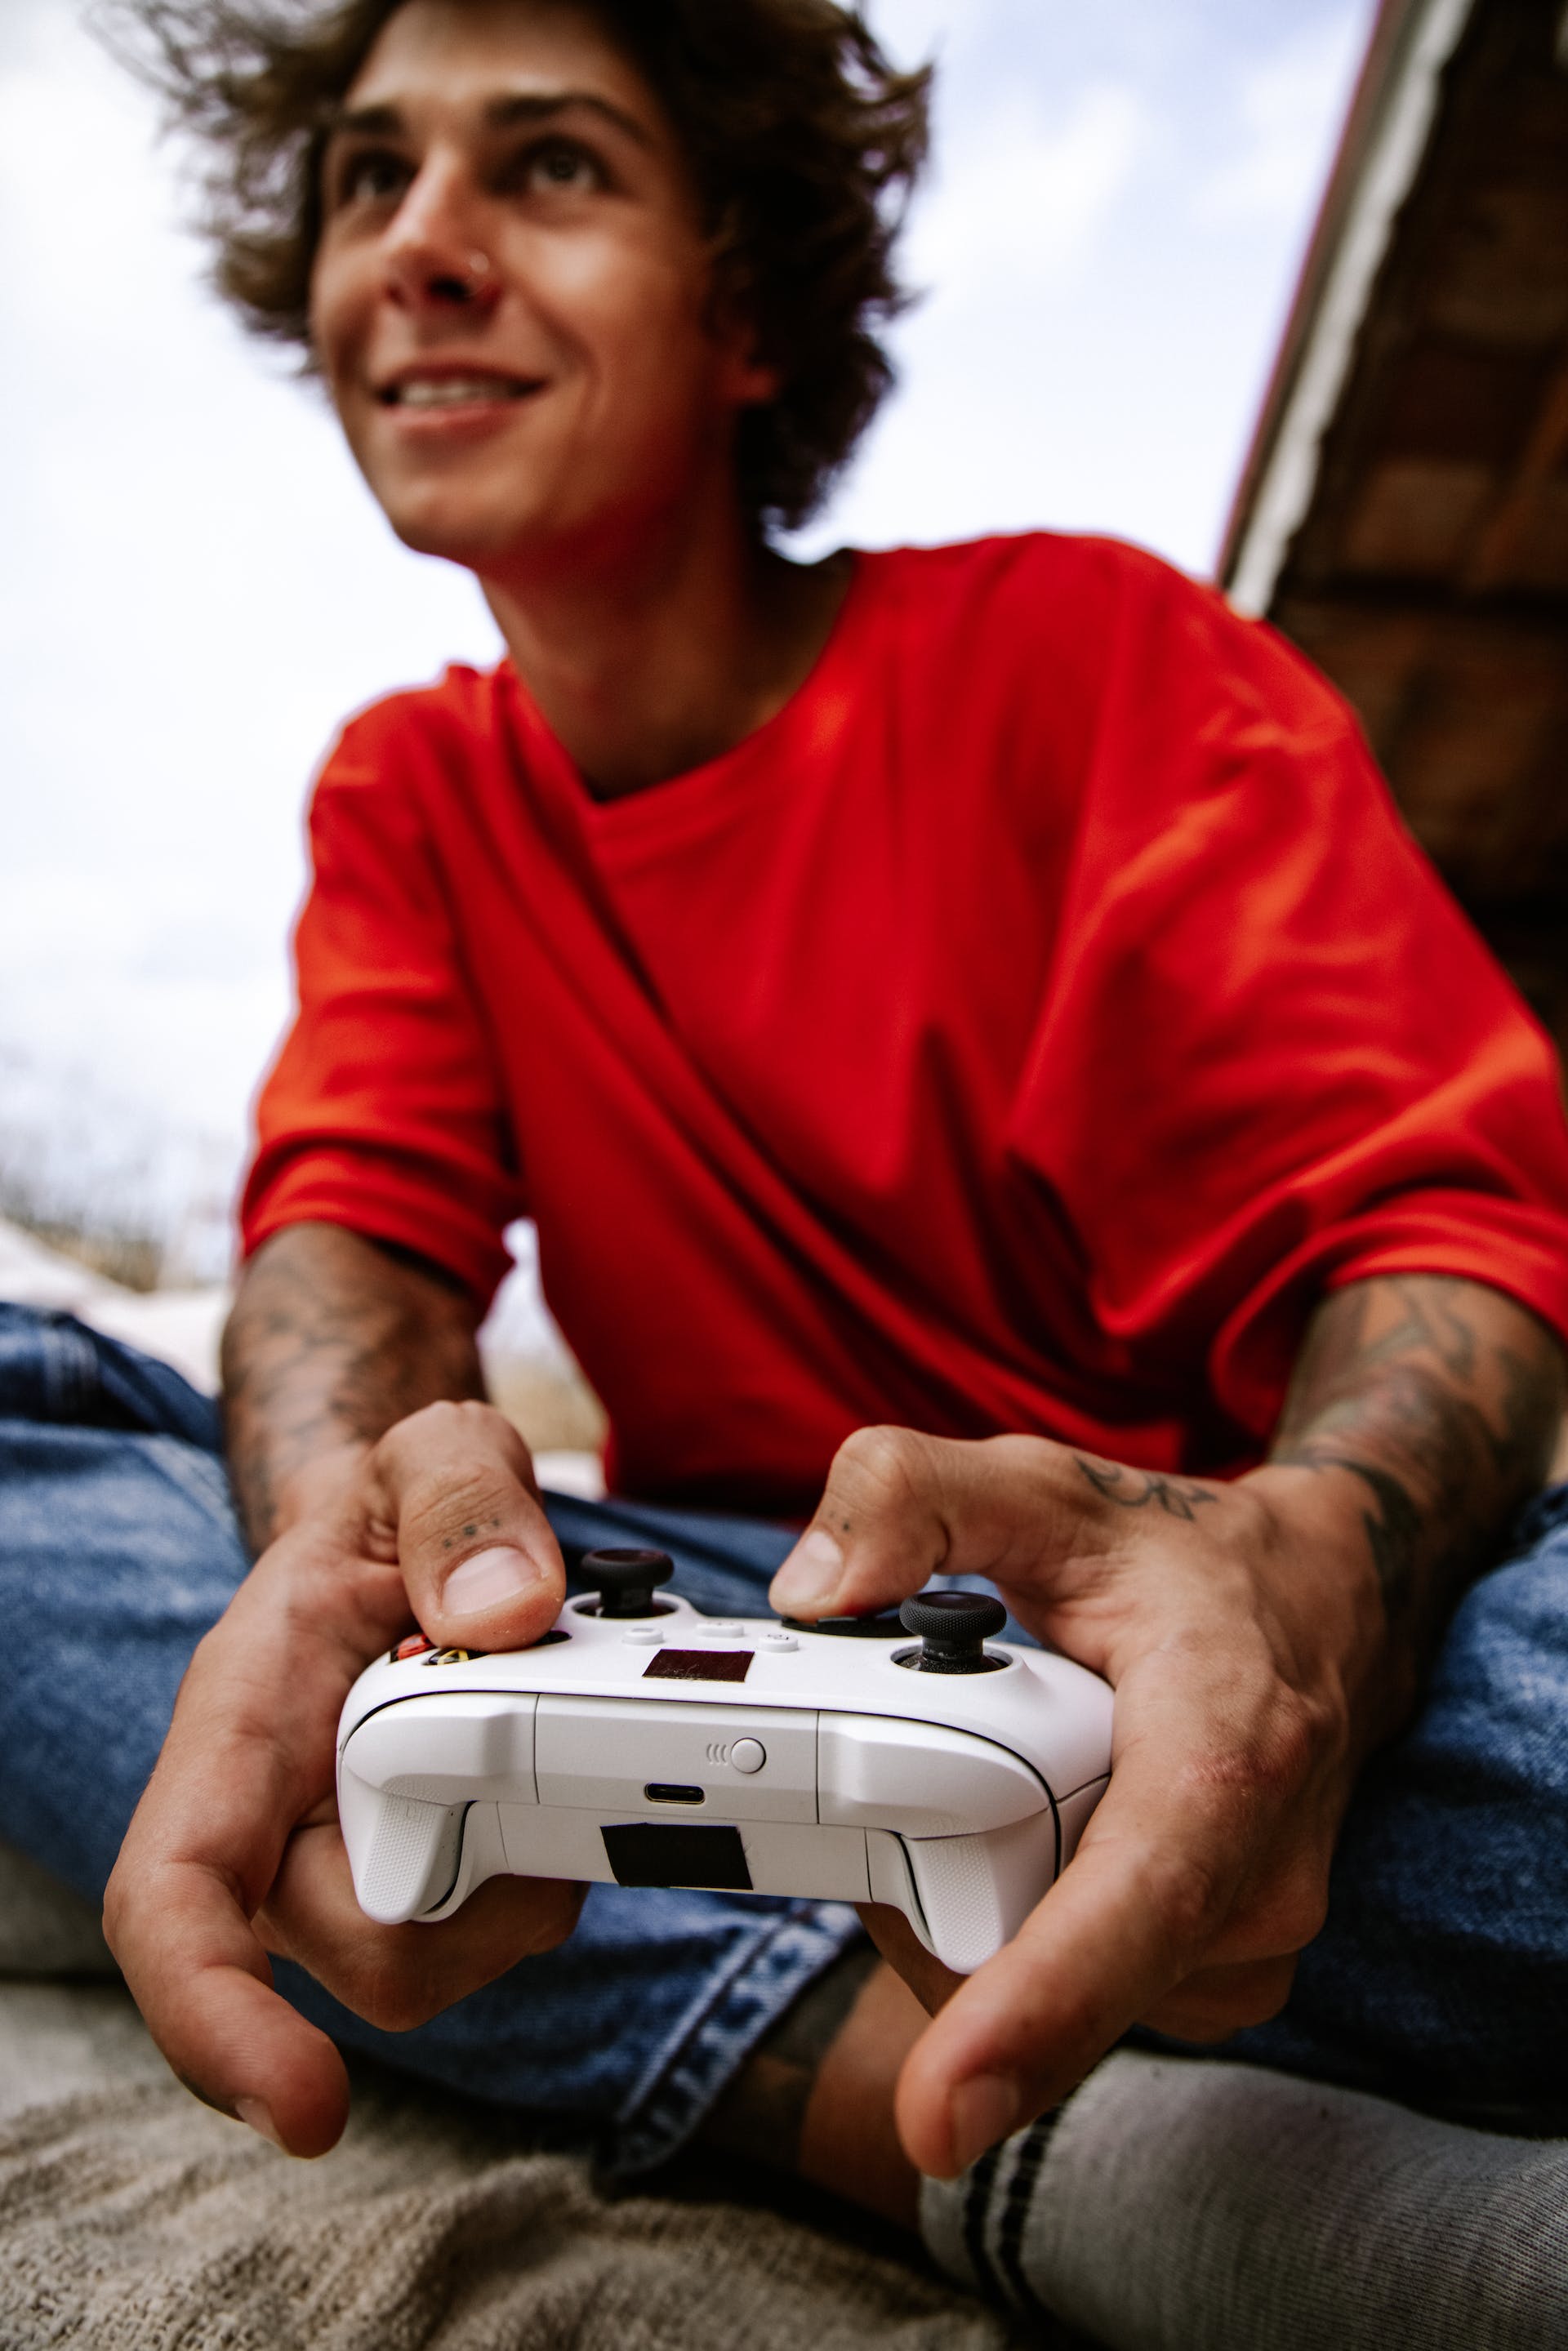 A man playing a video game | Source: Pexels